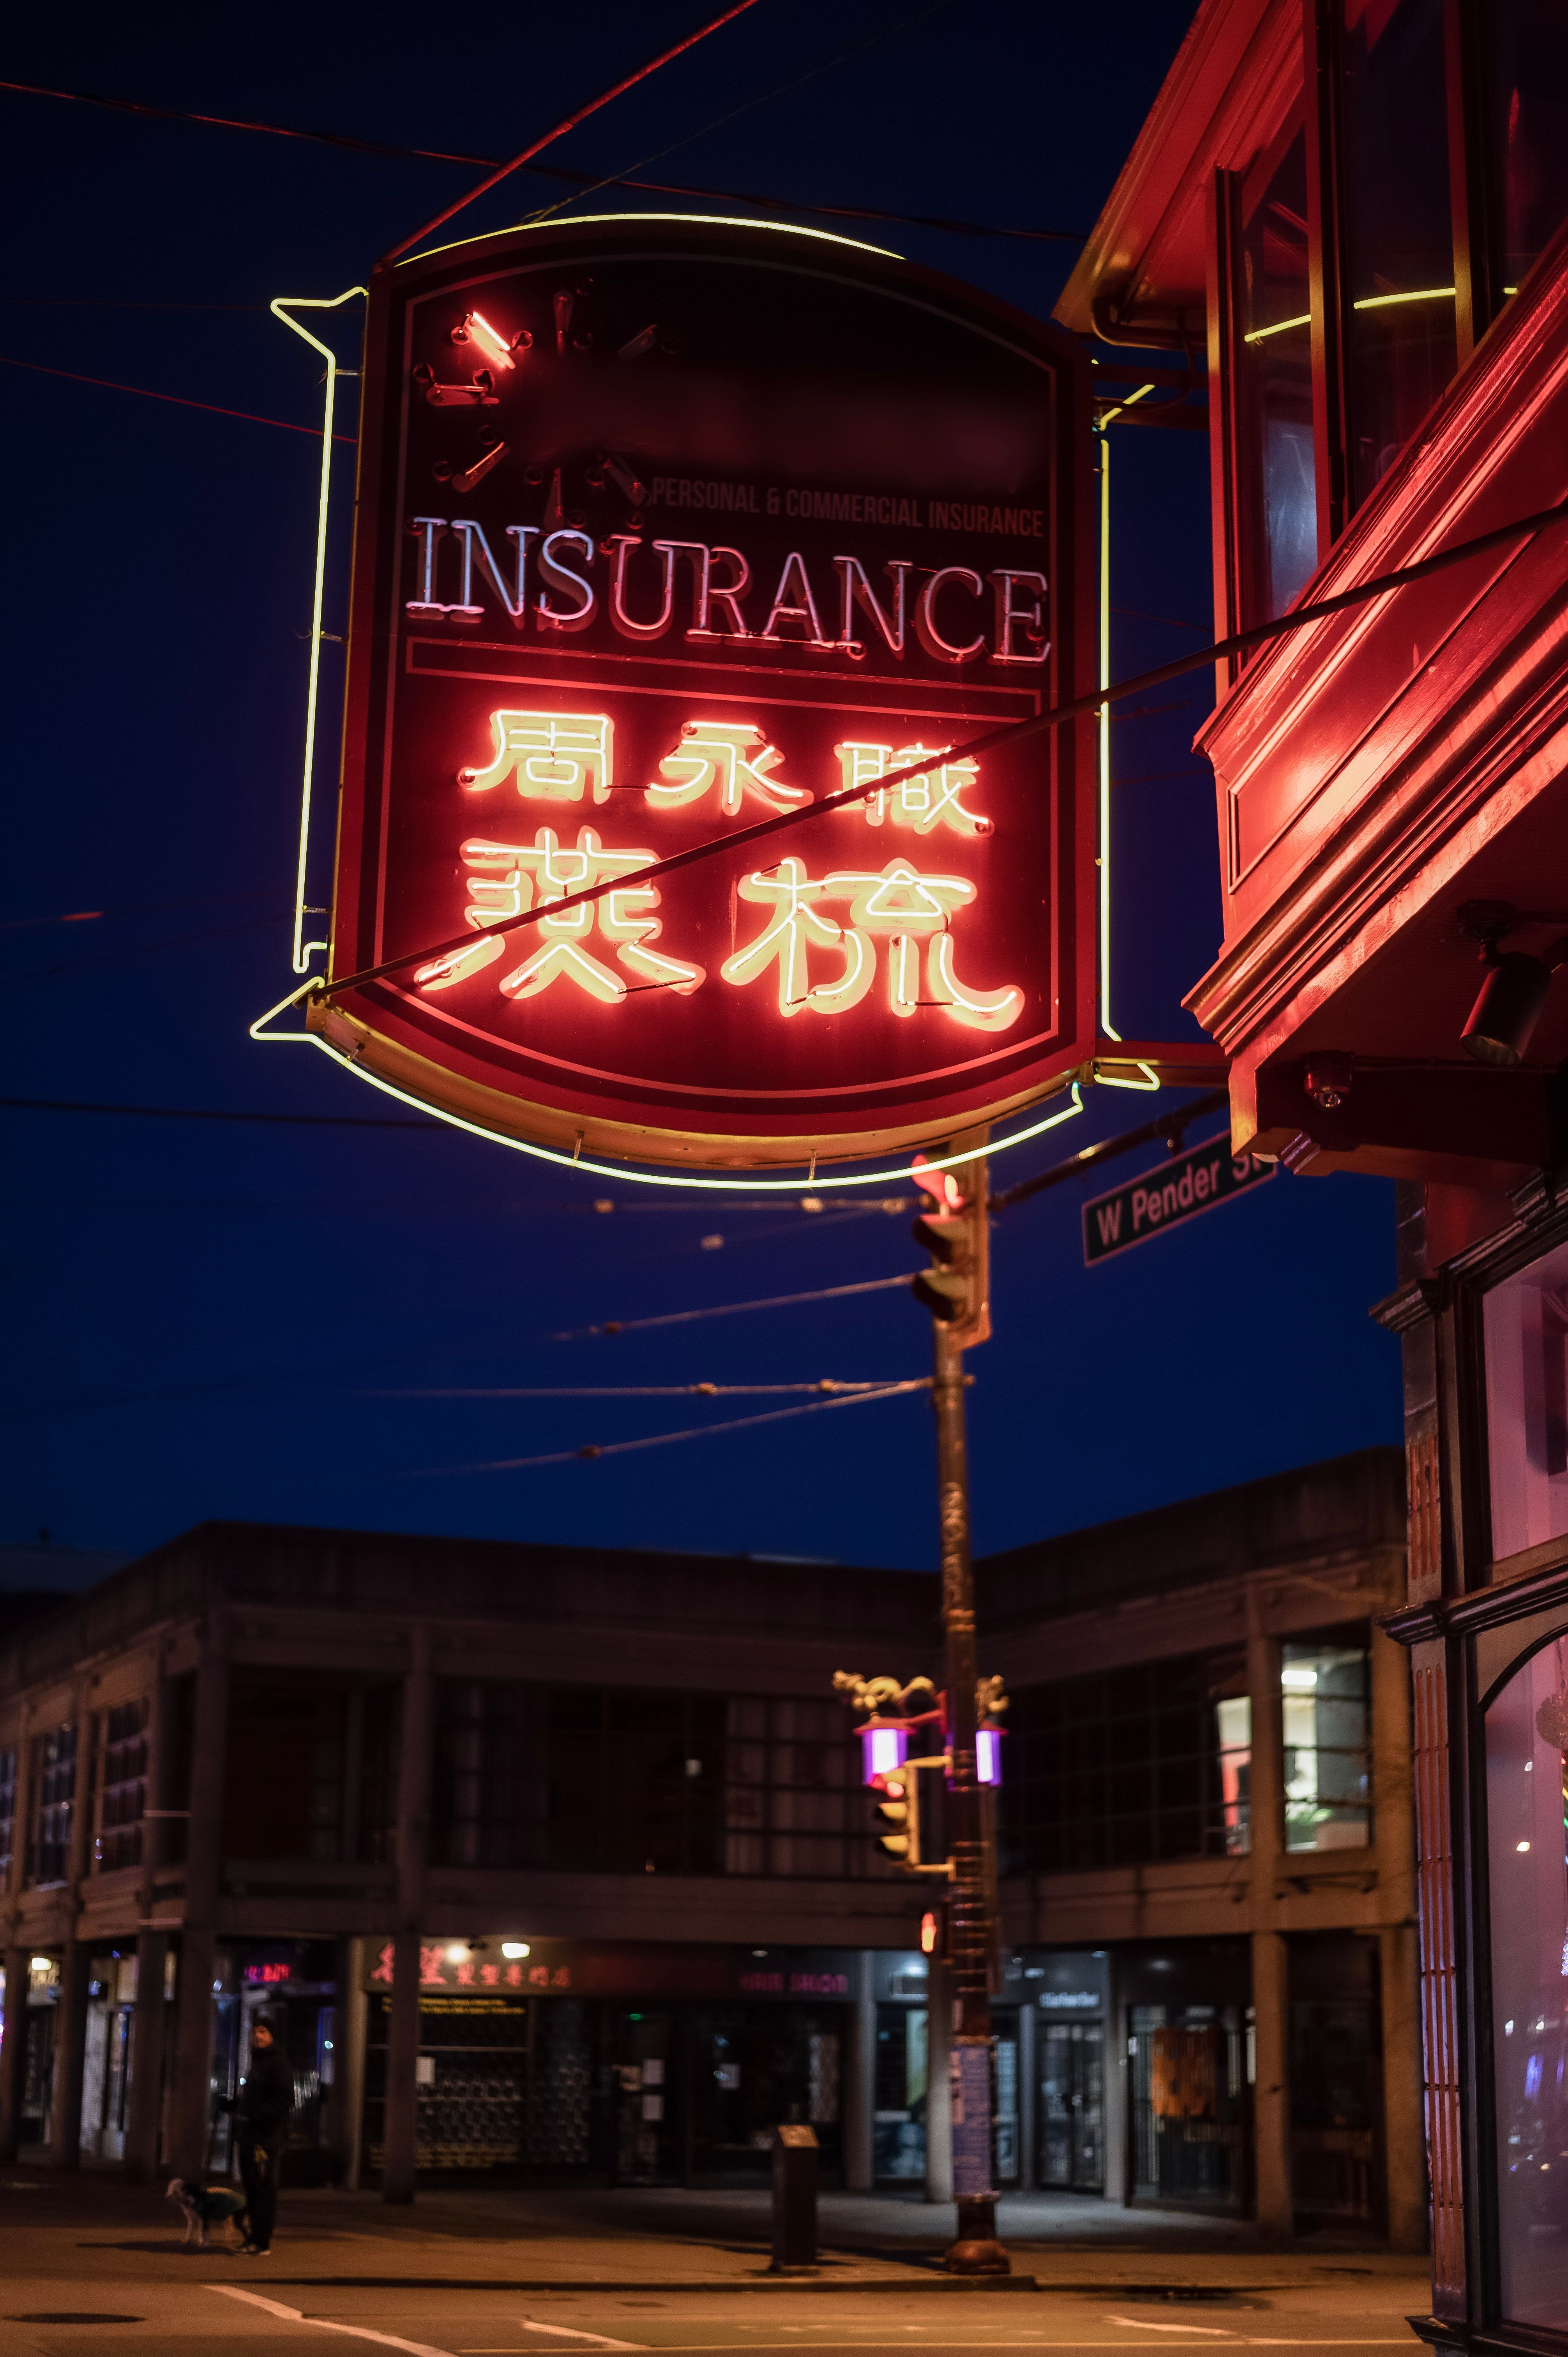 Photo of Insurance inscription on signboard in night city